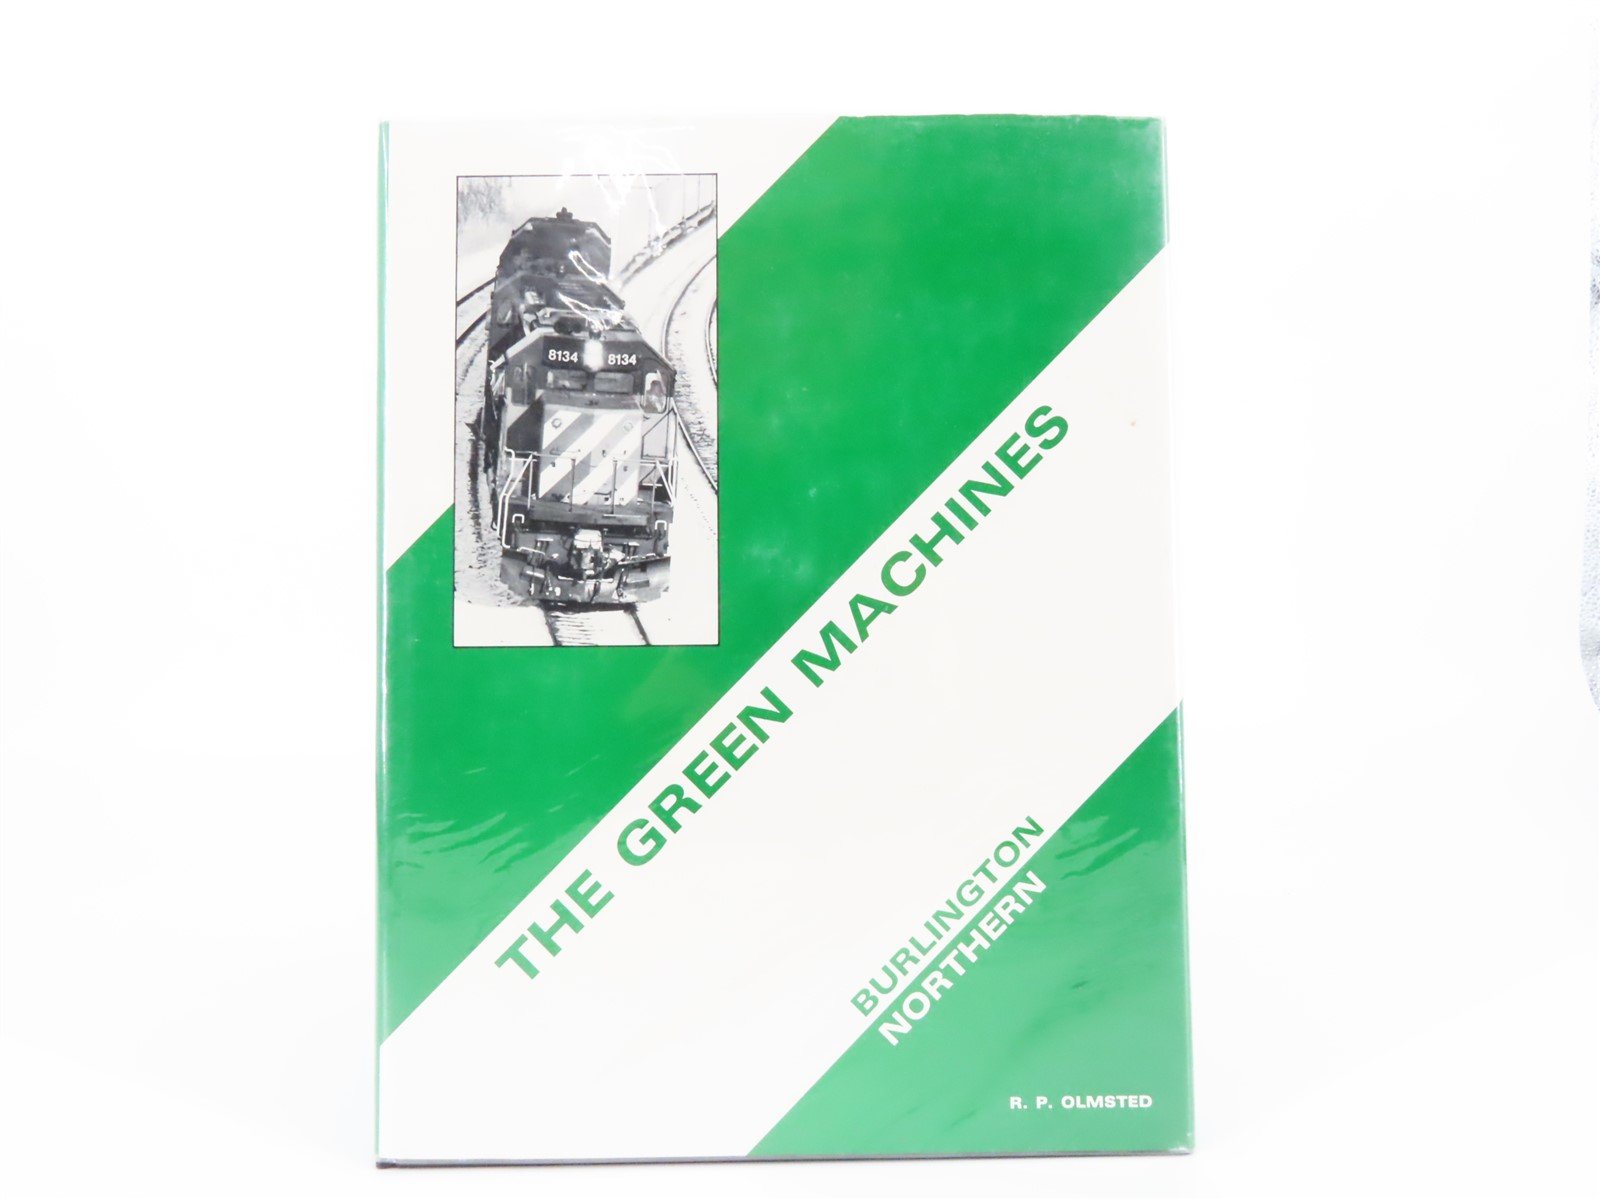 The Green Machines: Burlington Northern by Robert P. Olmsted ©1986 HC Book